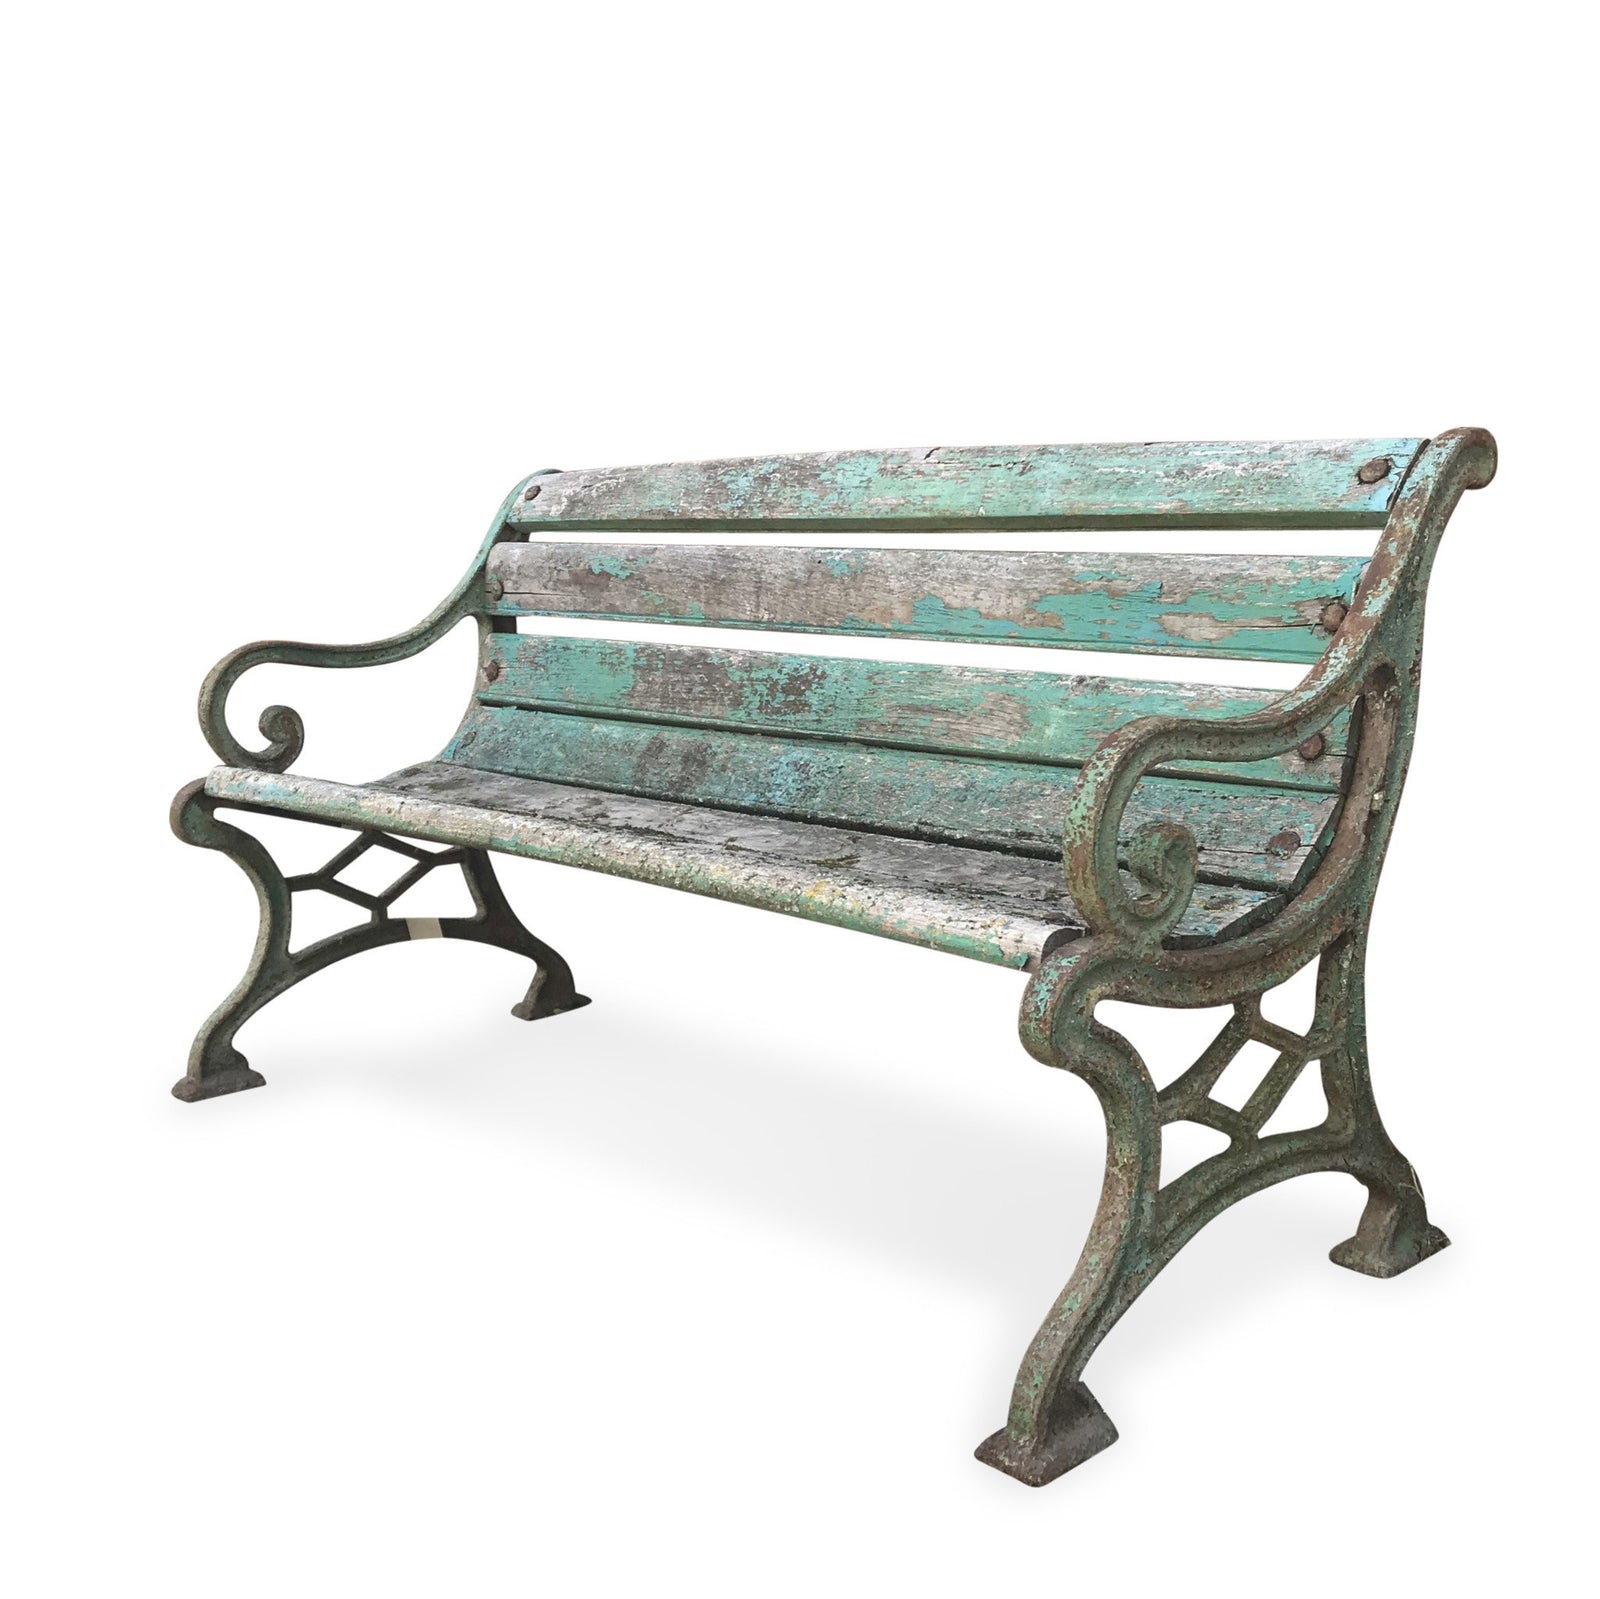 Vintage Green Painted Old Indian Cast Iron Bench from 1920's | INDIGO ANTIQUES